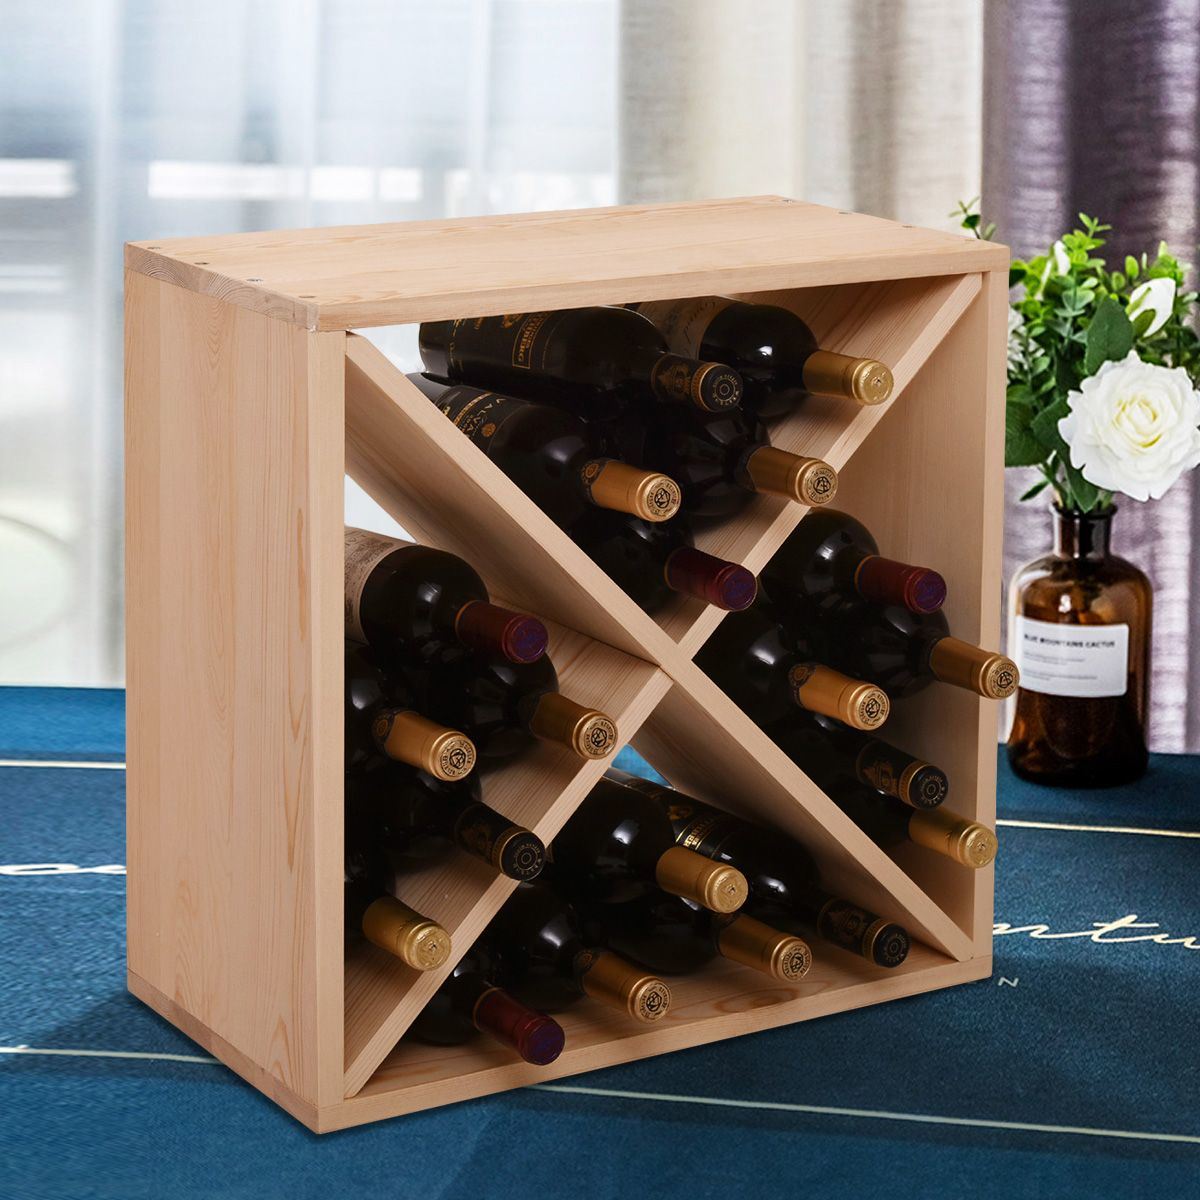 A 24 Bottle Modular Wine Rack, Stackable Wine Storage Cube for Bar Cellar Kitchen Dining Room, Burlywood capable of holding 24 bottles, positioned in front of a blue wall.